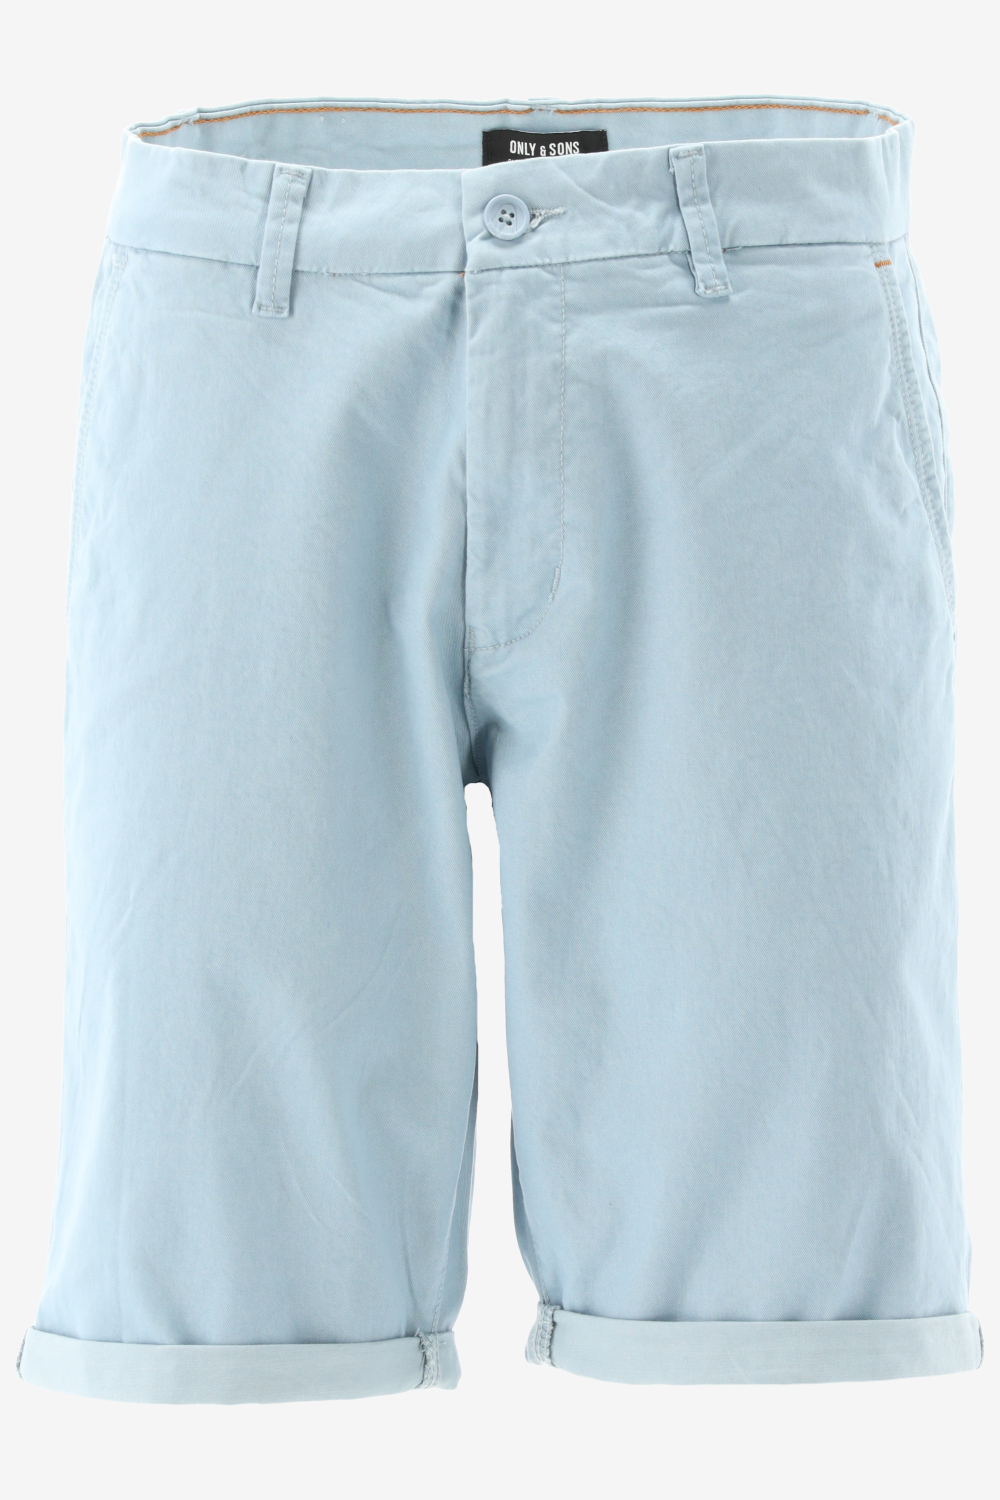 Only & Sons Short PETER